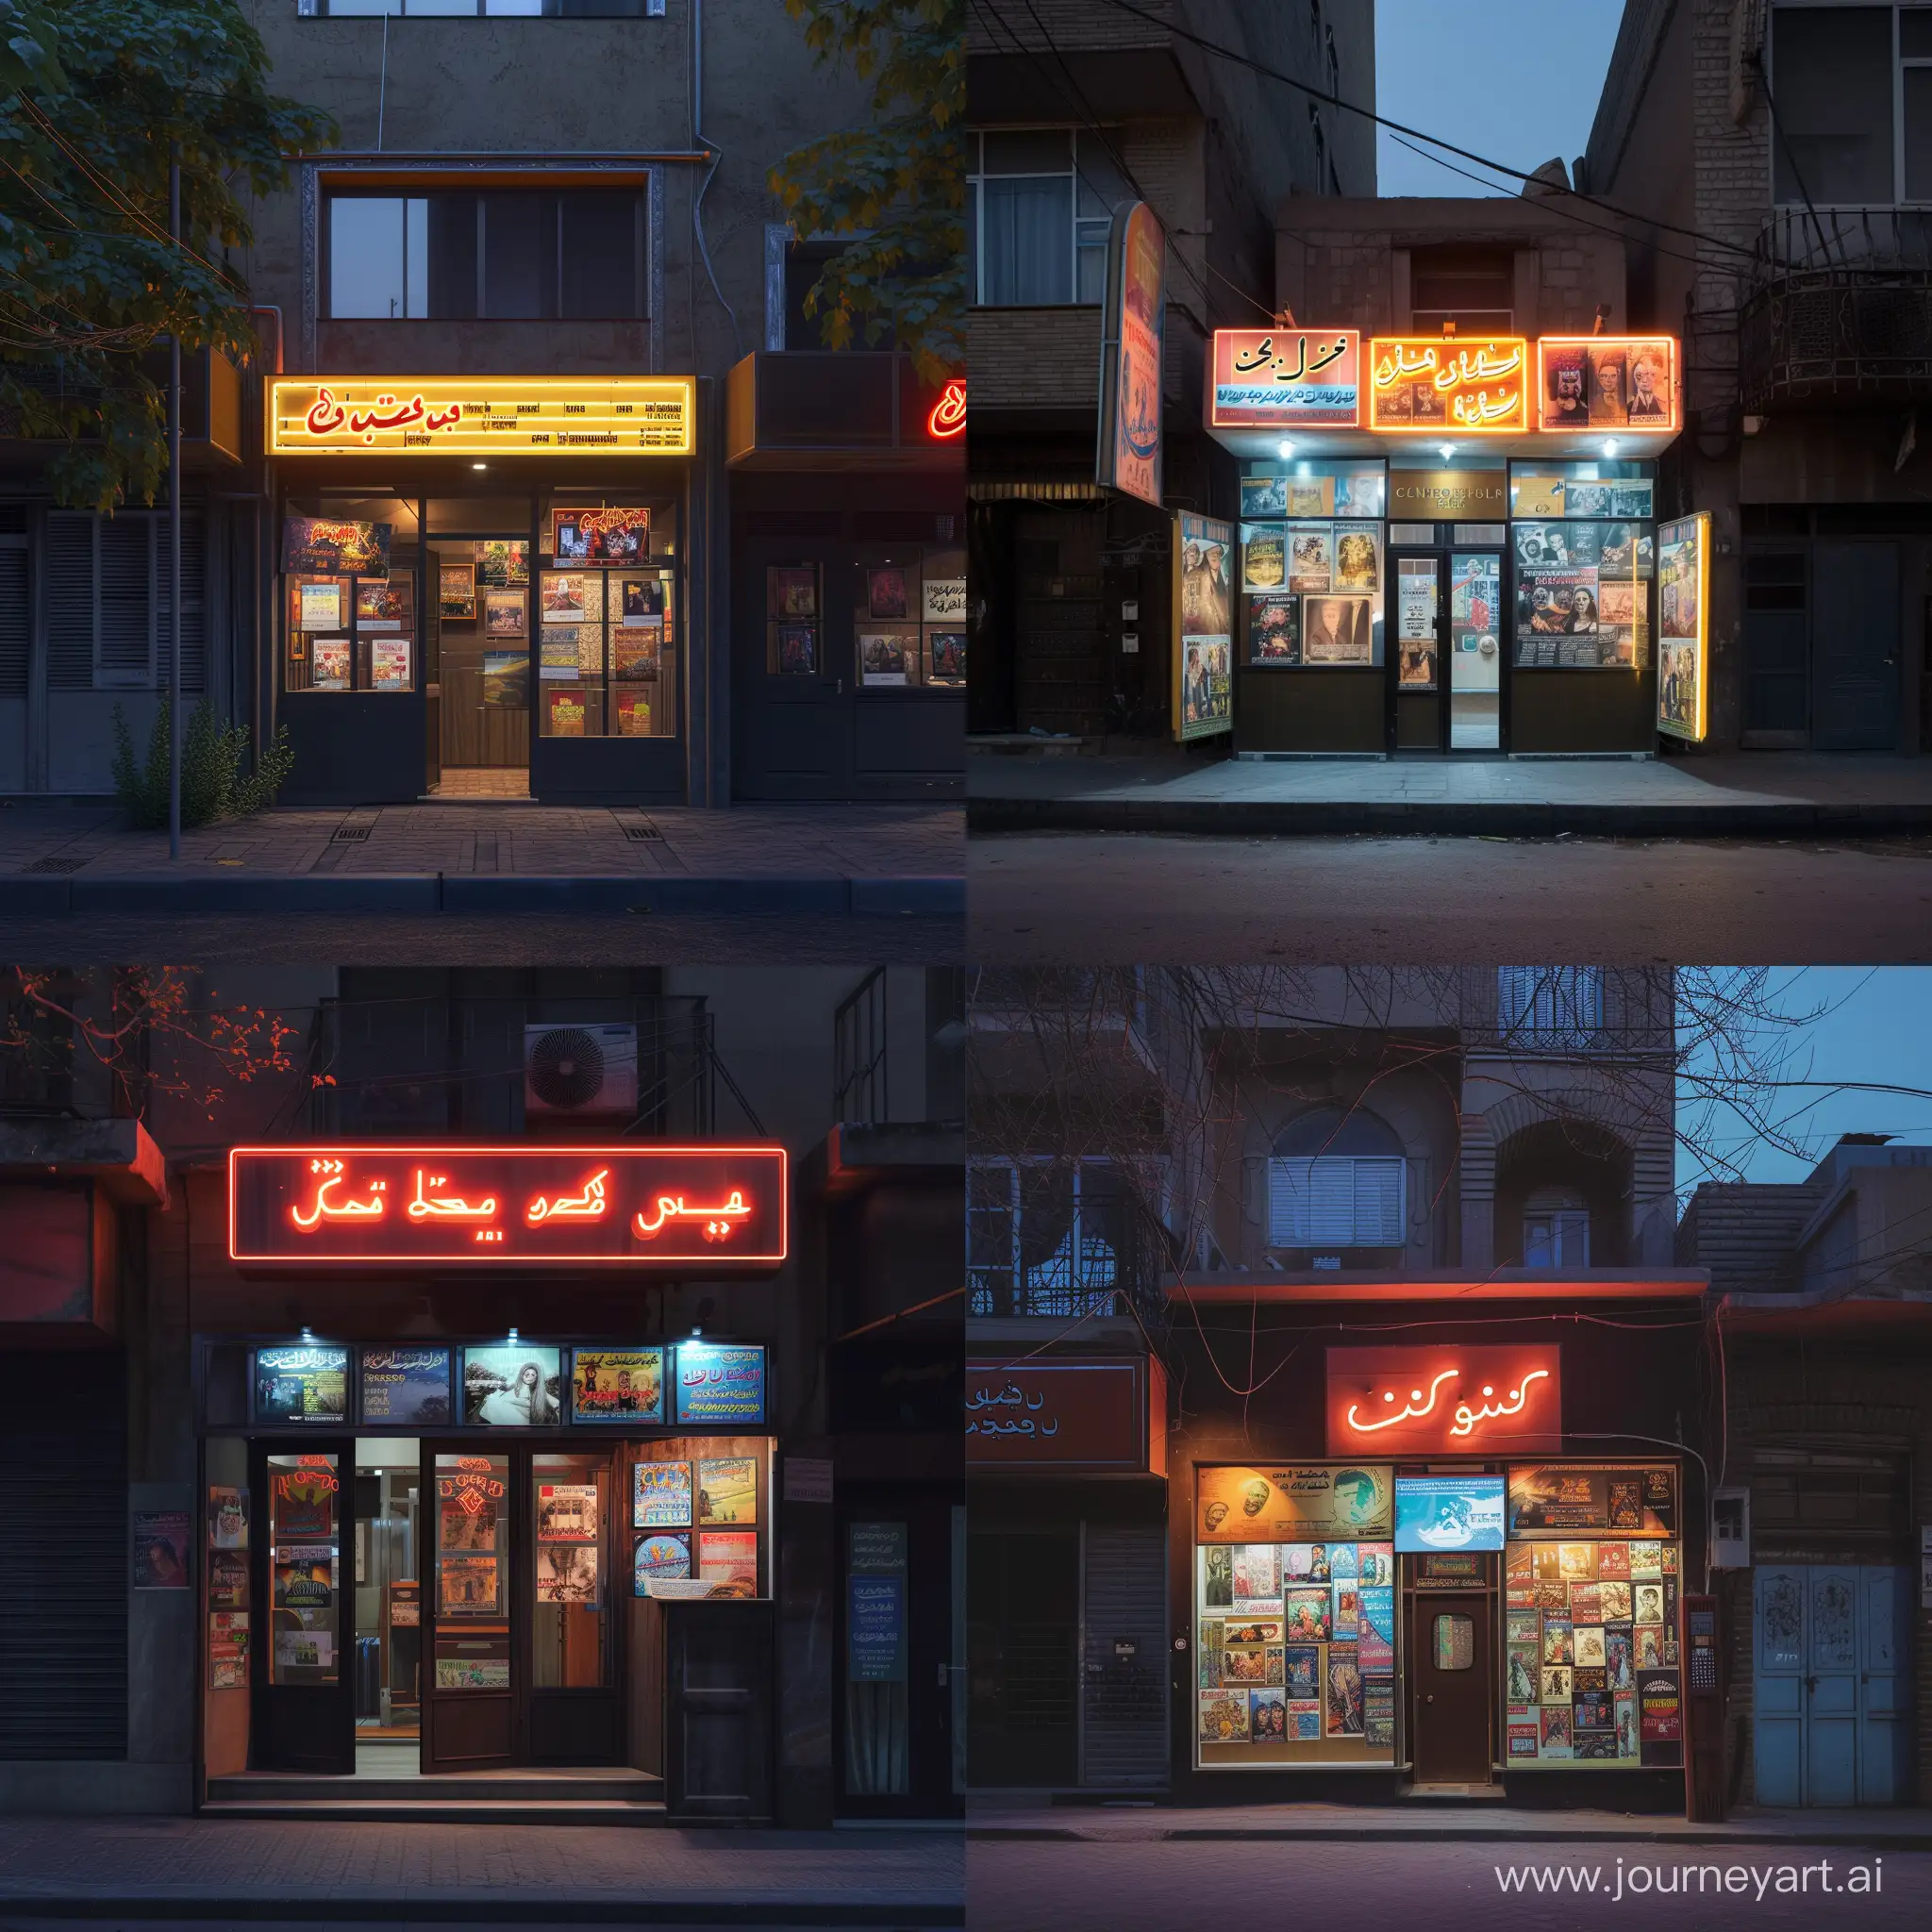 Design a small and local cinematheque in the context of one of Tehran's neighborhoods. Cinematheque is completely integrated in the urban and local context. Have a small and distinctive header and a showcase for displaying posters. The front of the cinema at night should be distinguished by neon signs. The output is similar to realistic photos.